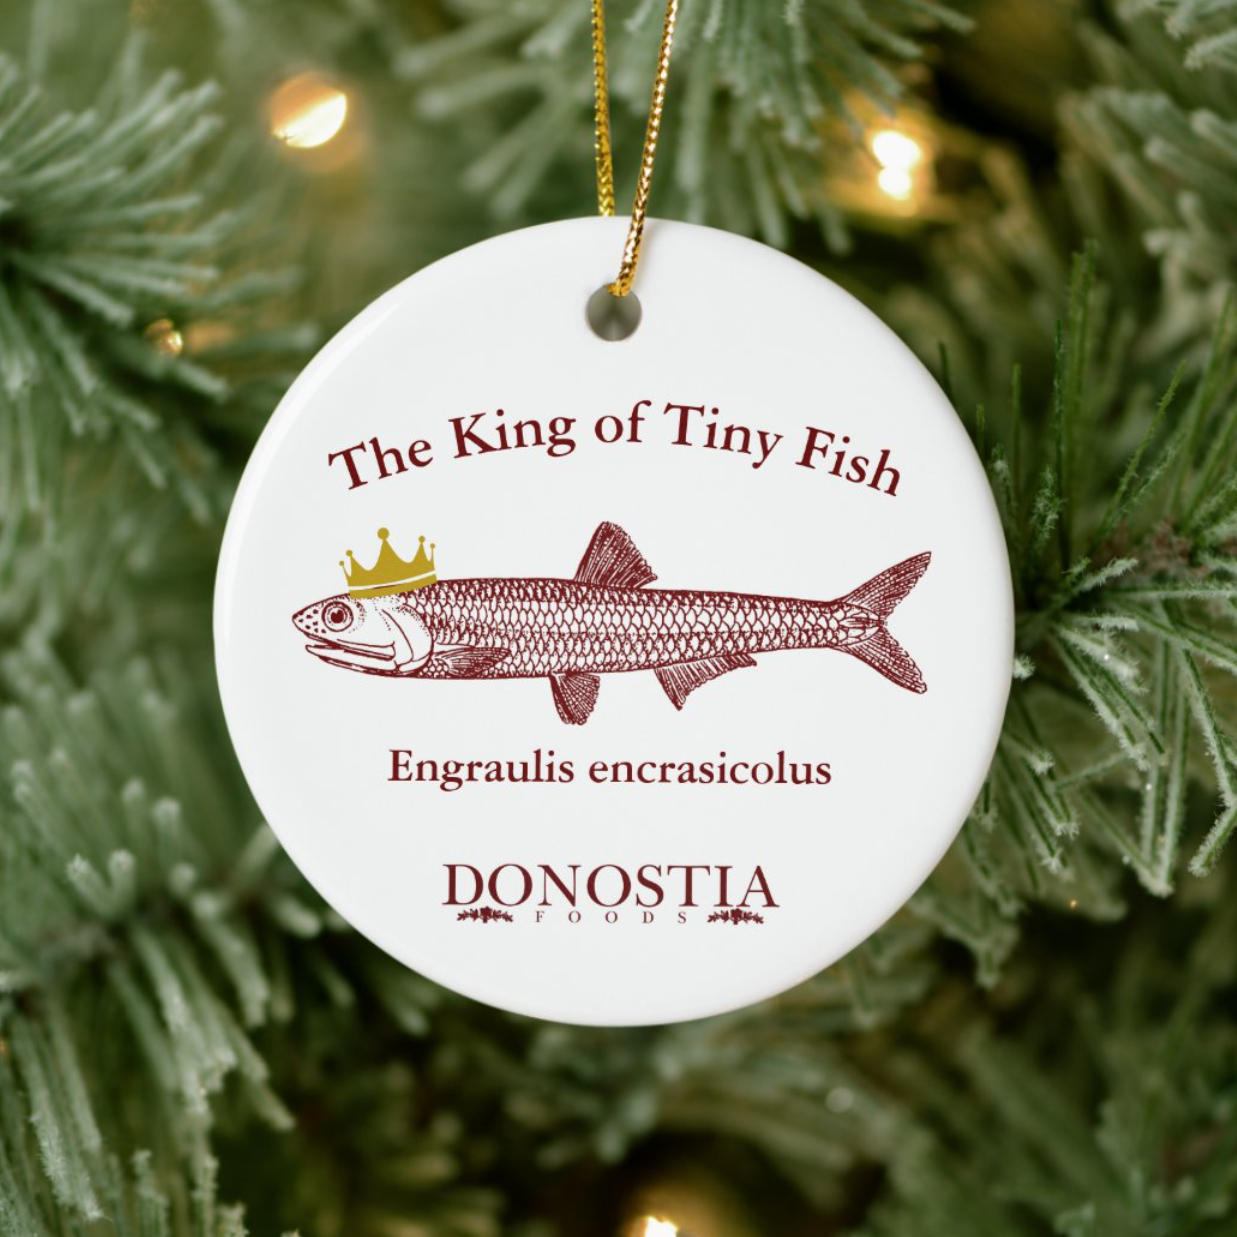 The King of Tiny Fish Christmas Ornament in a Tree - Donostia Foods